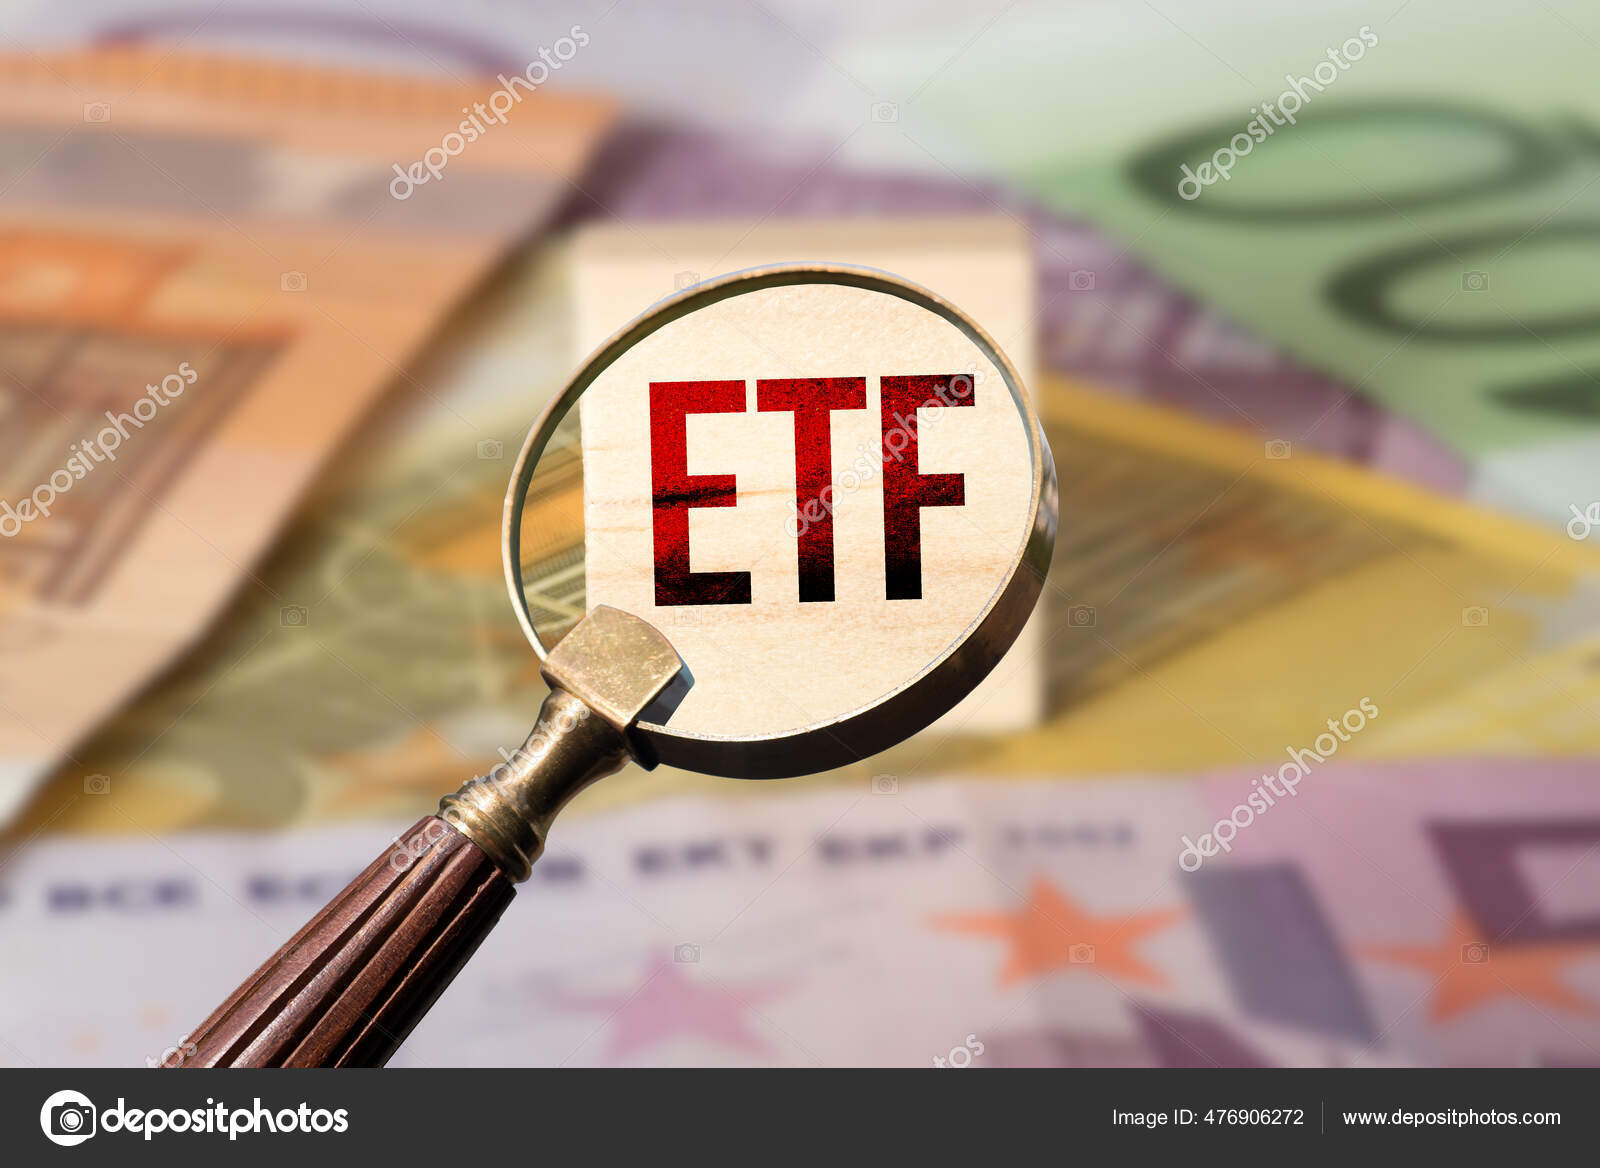 Etf Exchange Traded Funds